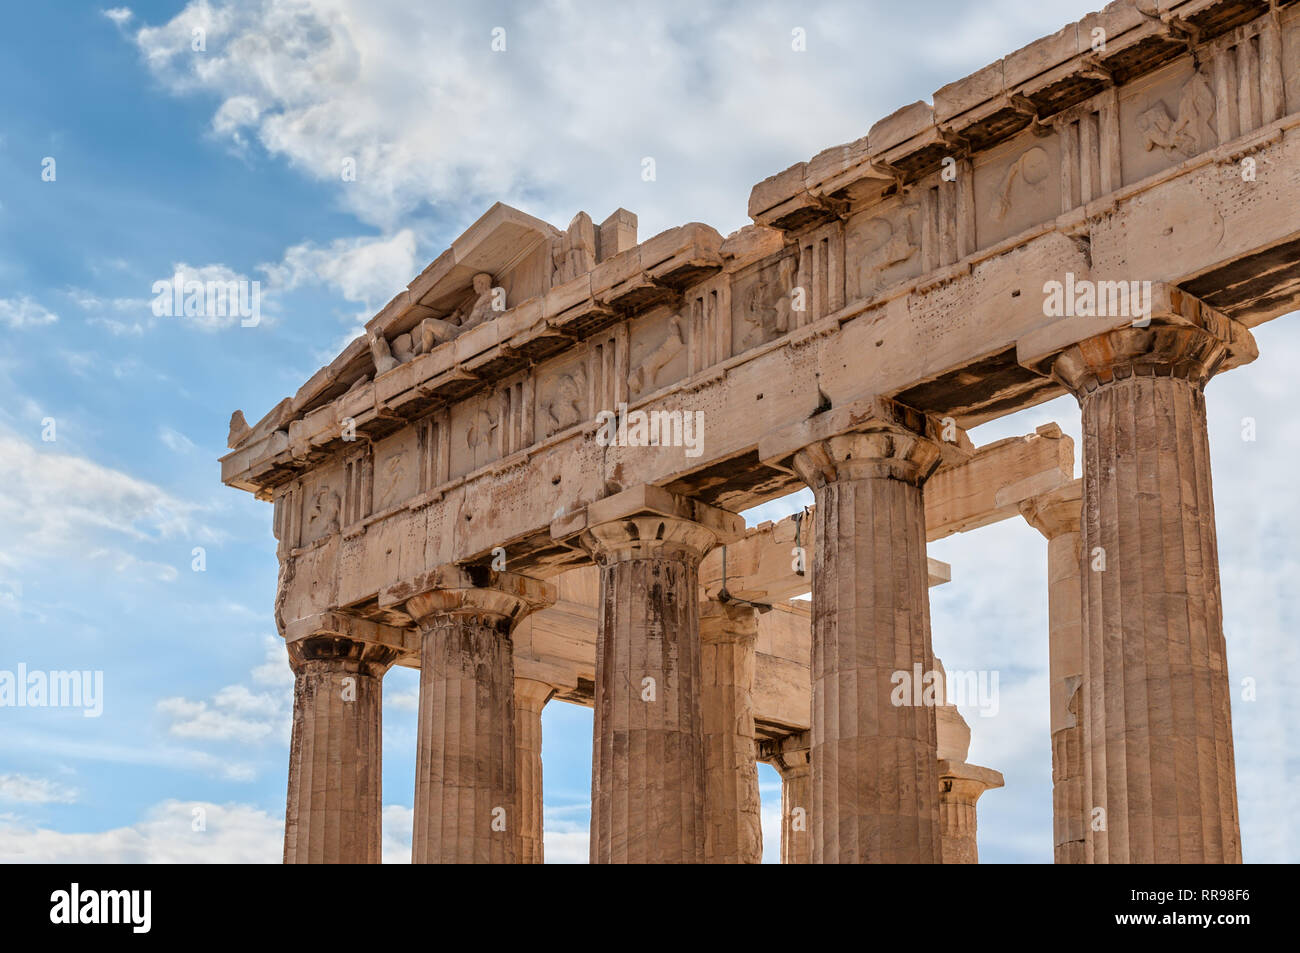 Fragment of the Parthenon with statues, an archaic temple located on the Acropolis of Athens, built in 438 BC in Athens, Greece Stock Photo